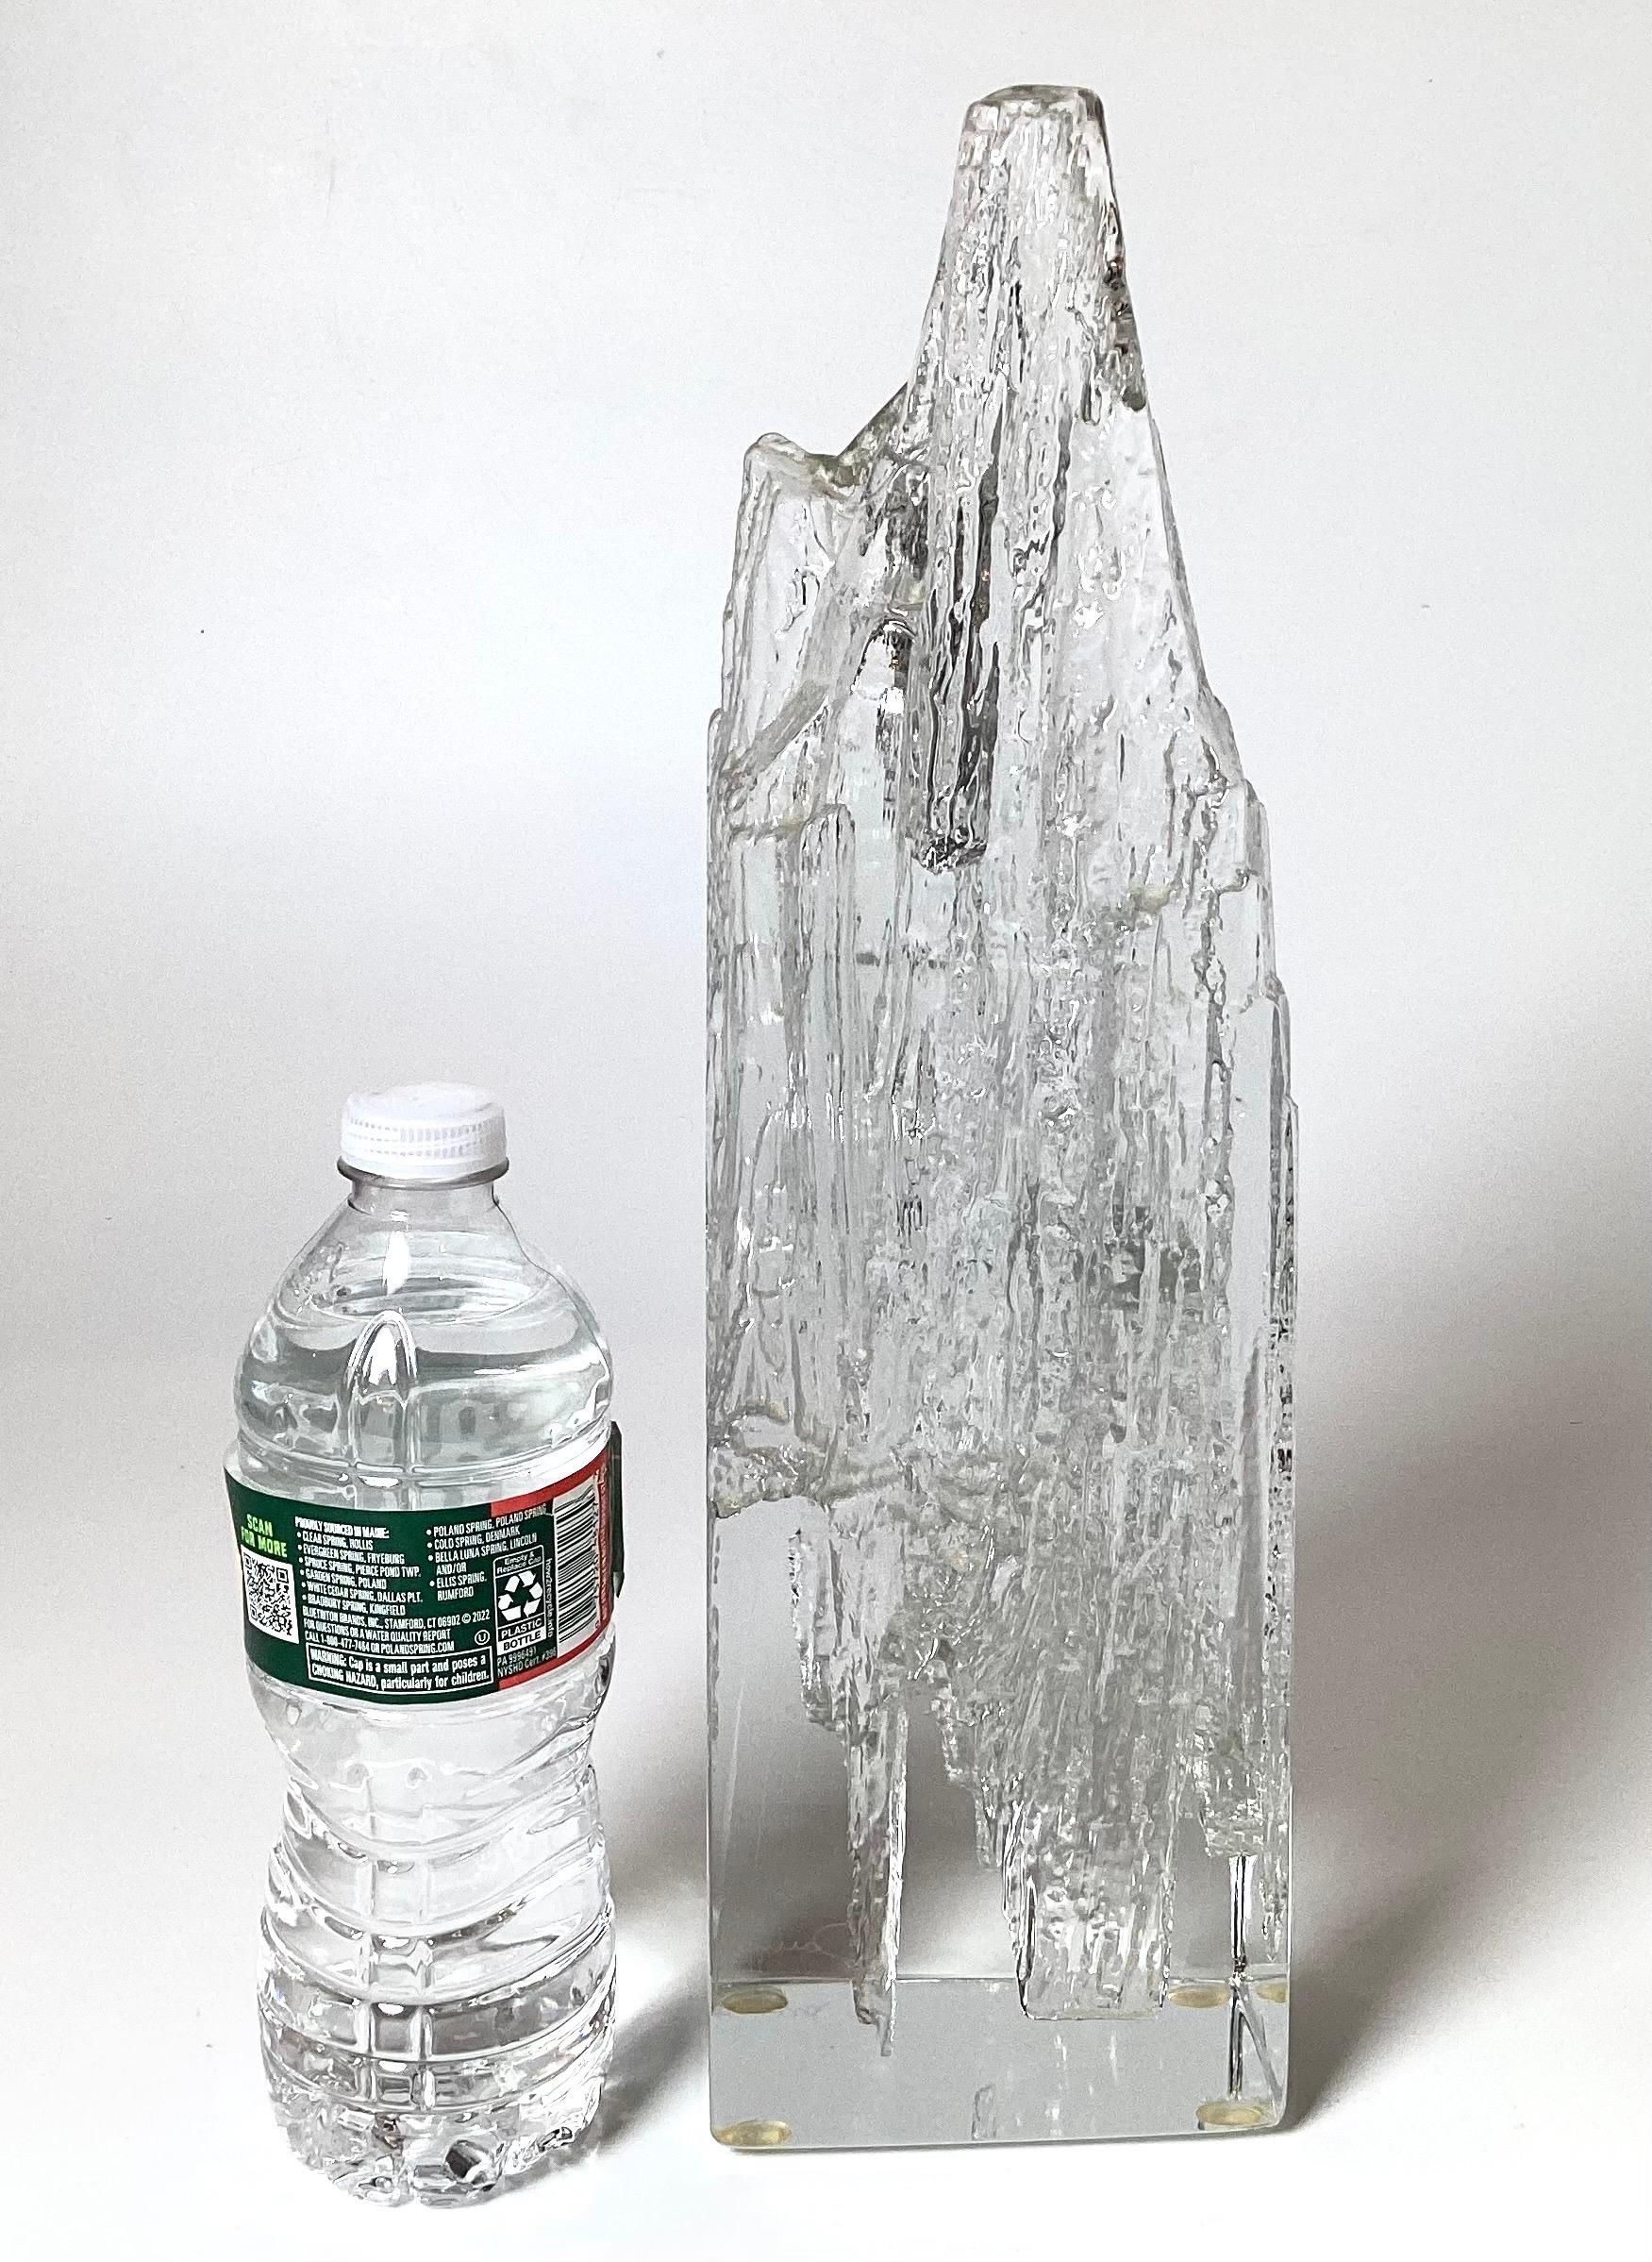 A clear art glass sculpture in a Brutalist style of an iceberg by Daum made in France, signed at the bottom, 1970s. Measures: 14.5 inches tall, 4.25 wide, 3.5 deep.